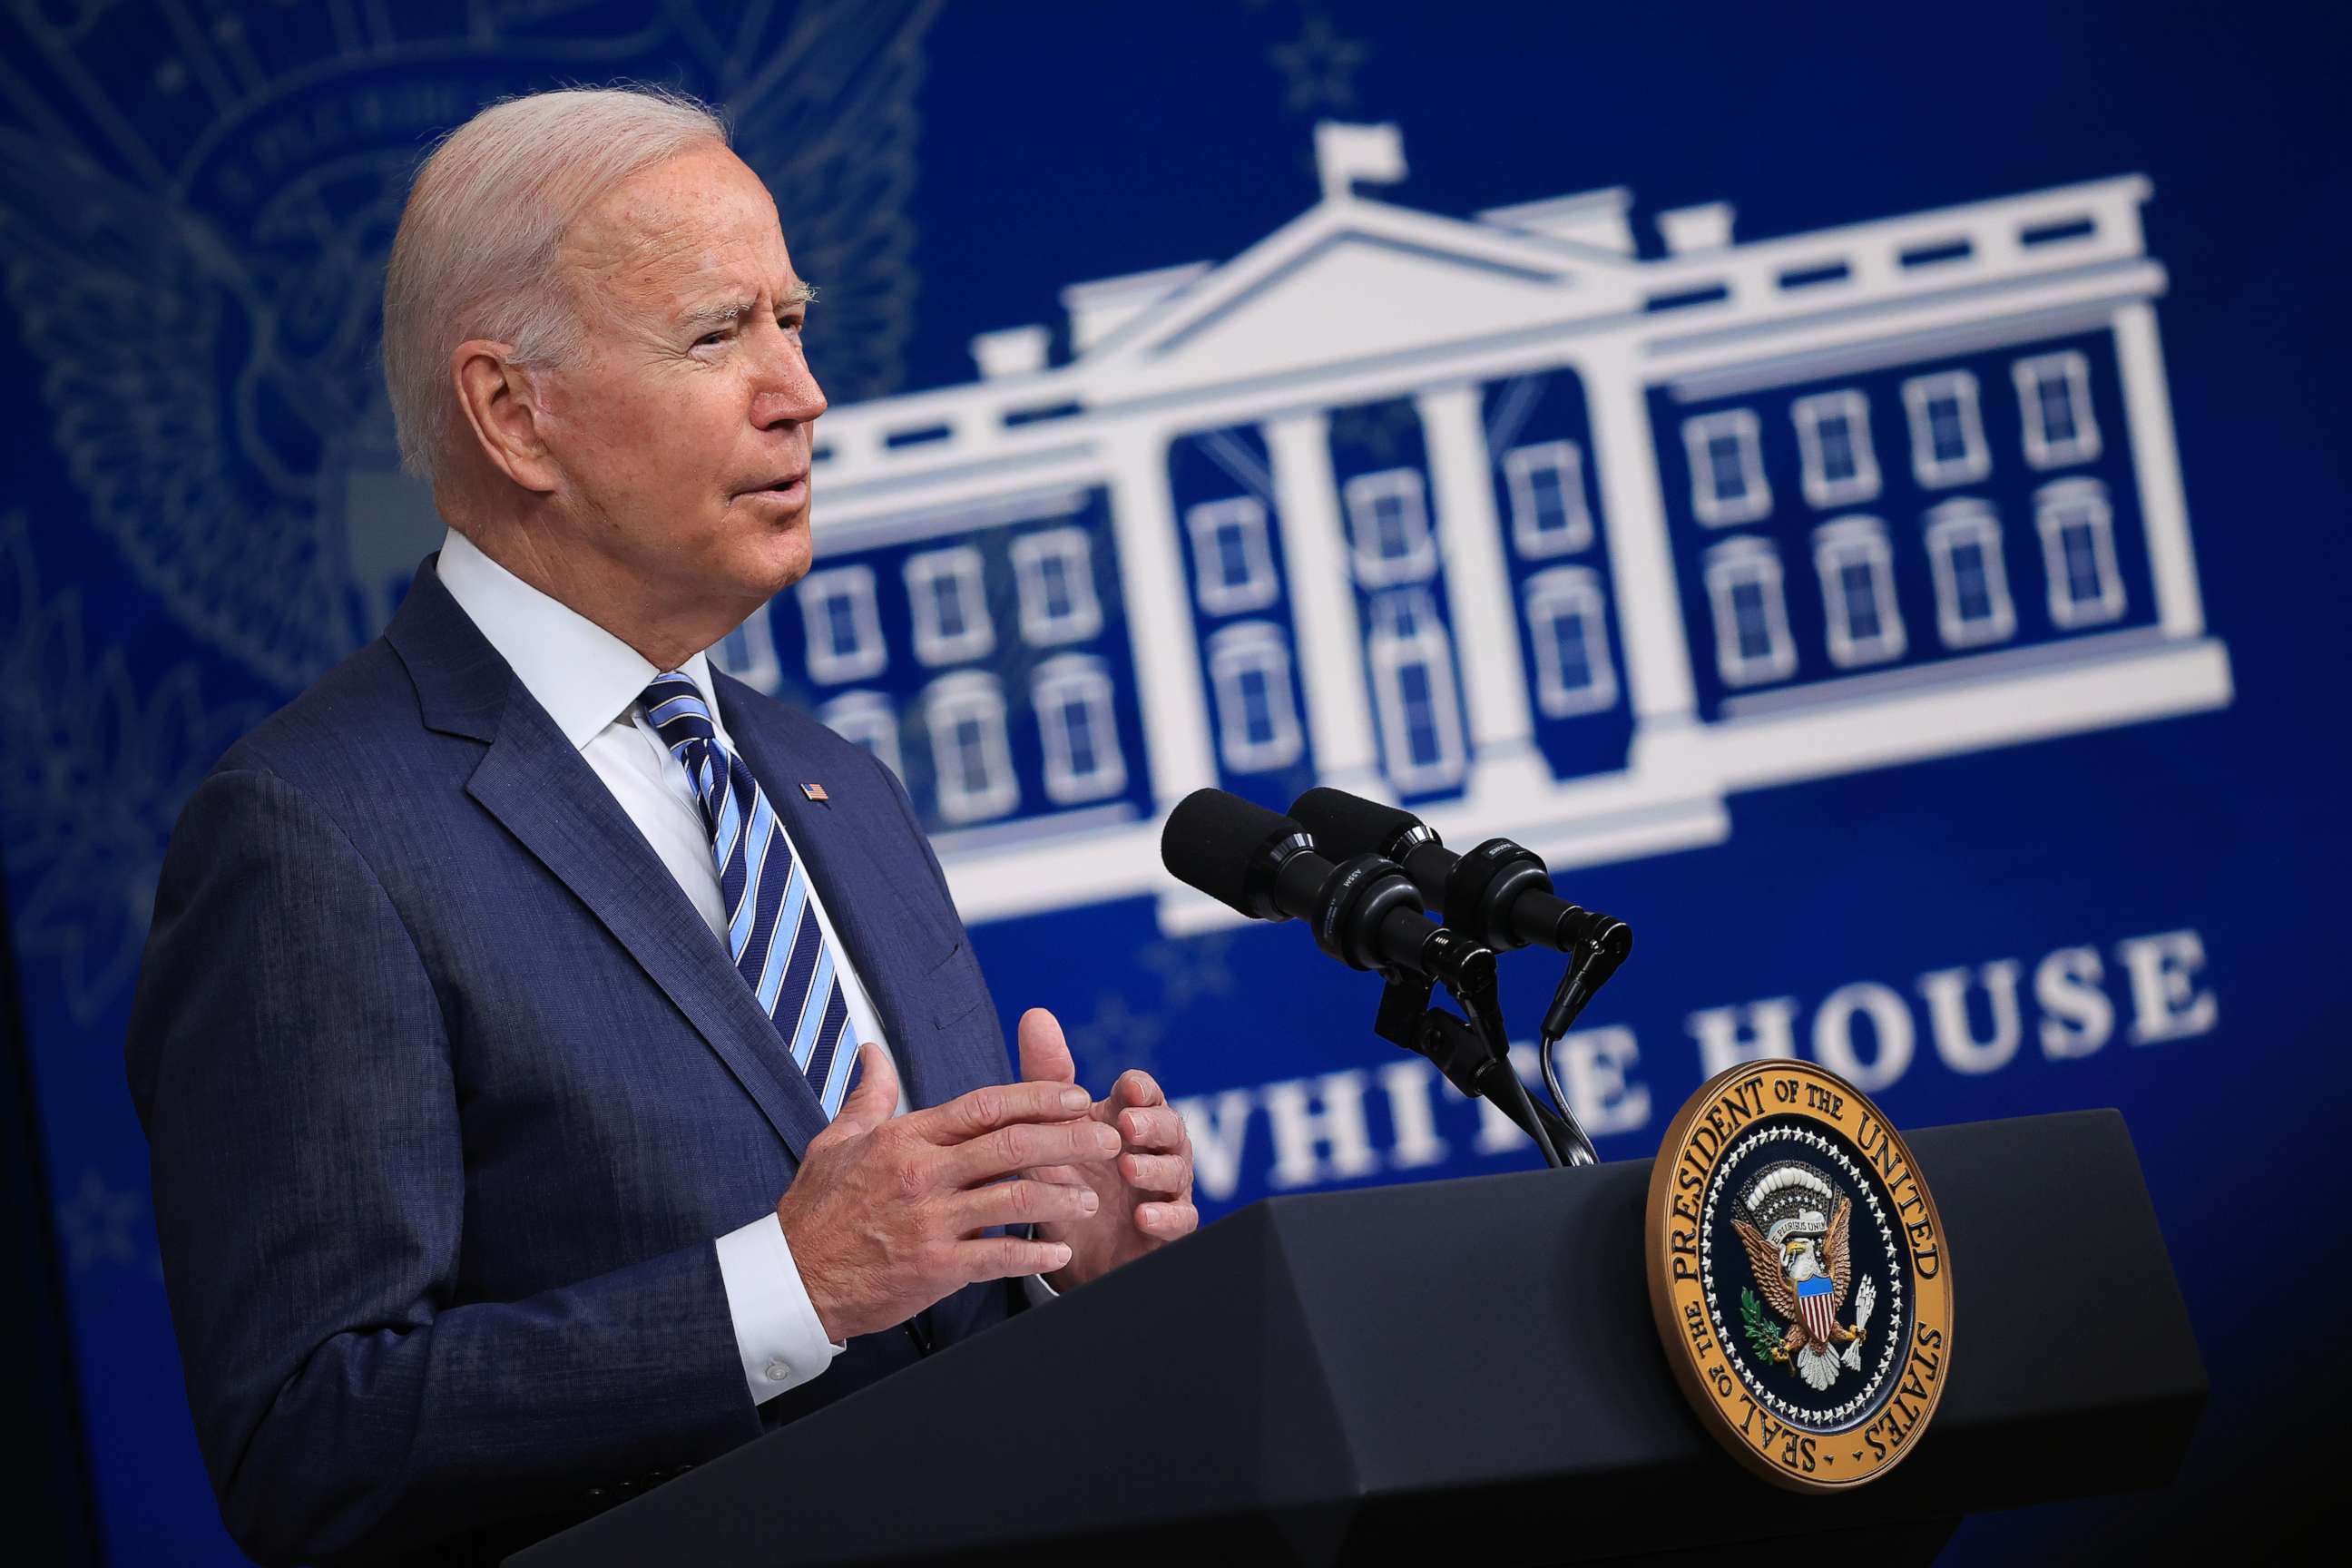 PHOTO: President Joe Biden delivers remarks about the ongoing federal response to Hurricane Ida in the South Court Auditorium of the Eisenhower Executive Office Building on Sept. 2, 2021, in Washington, D.C.